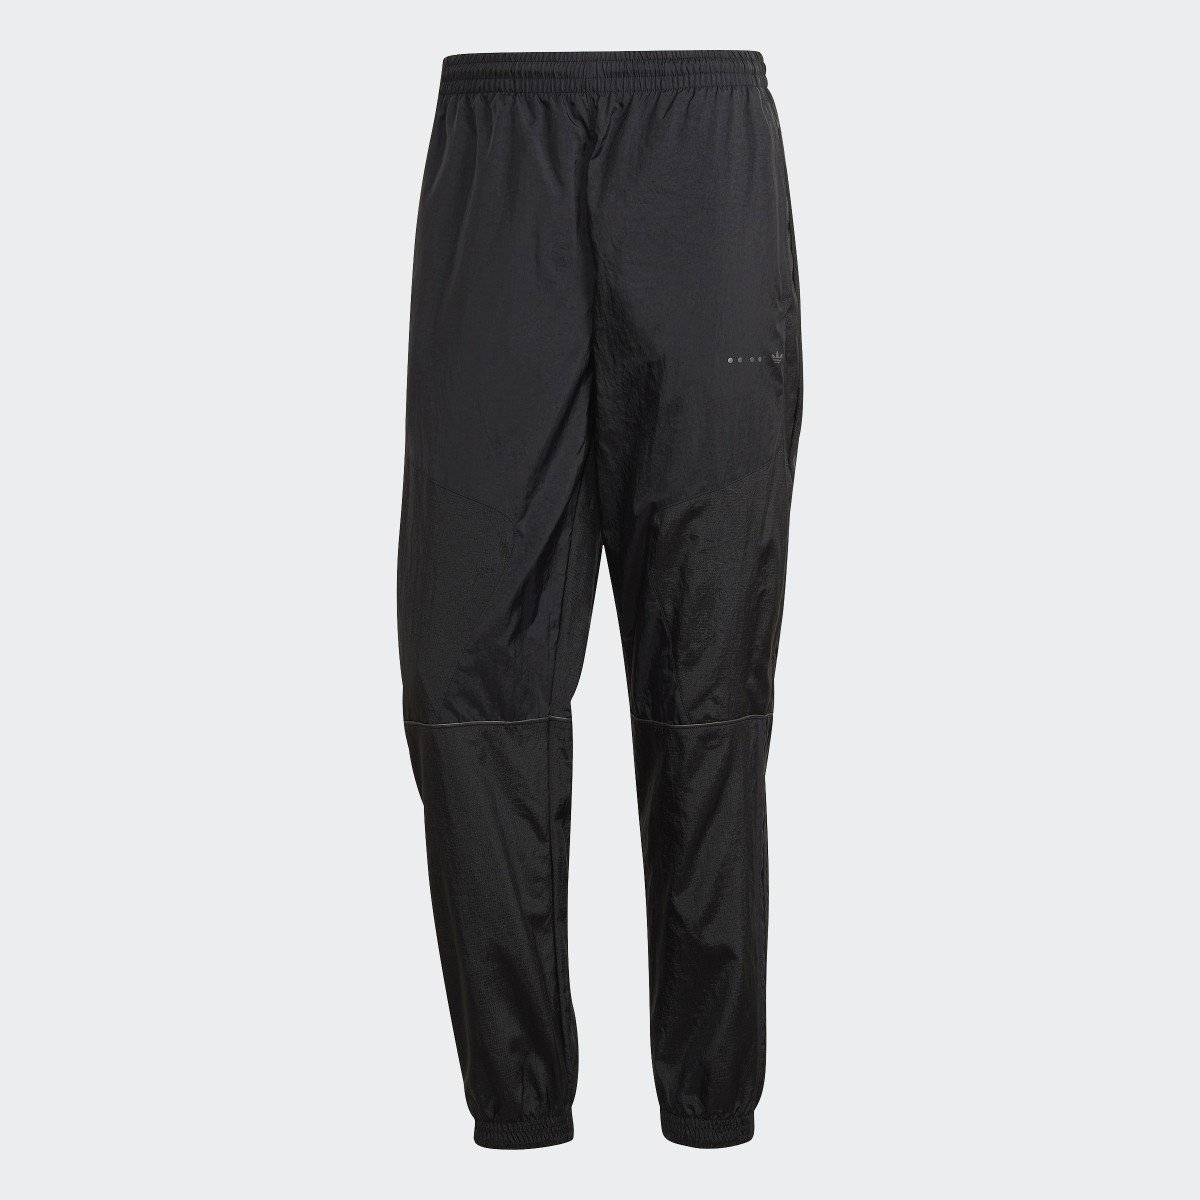 Adidas Reveal Material Mix Track Pants. 4